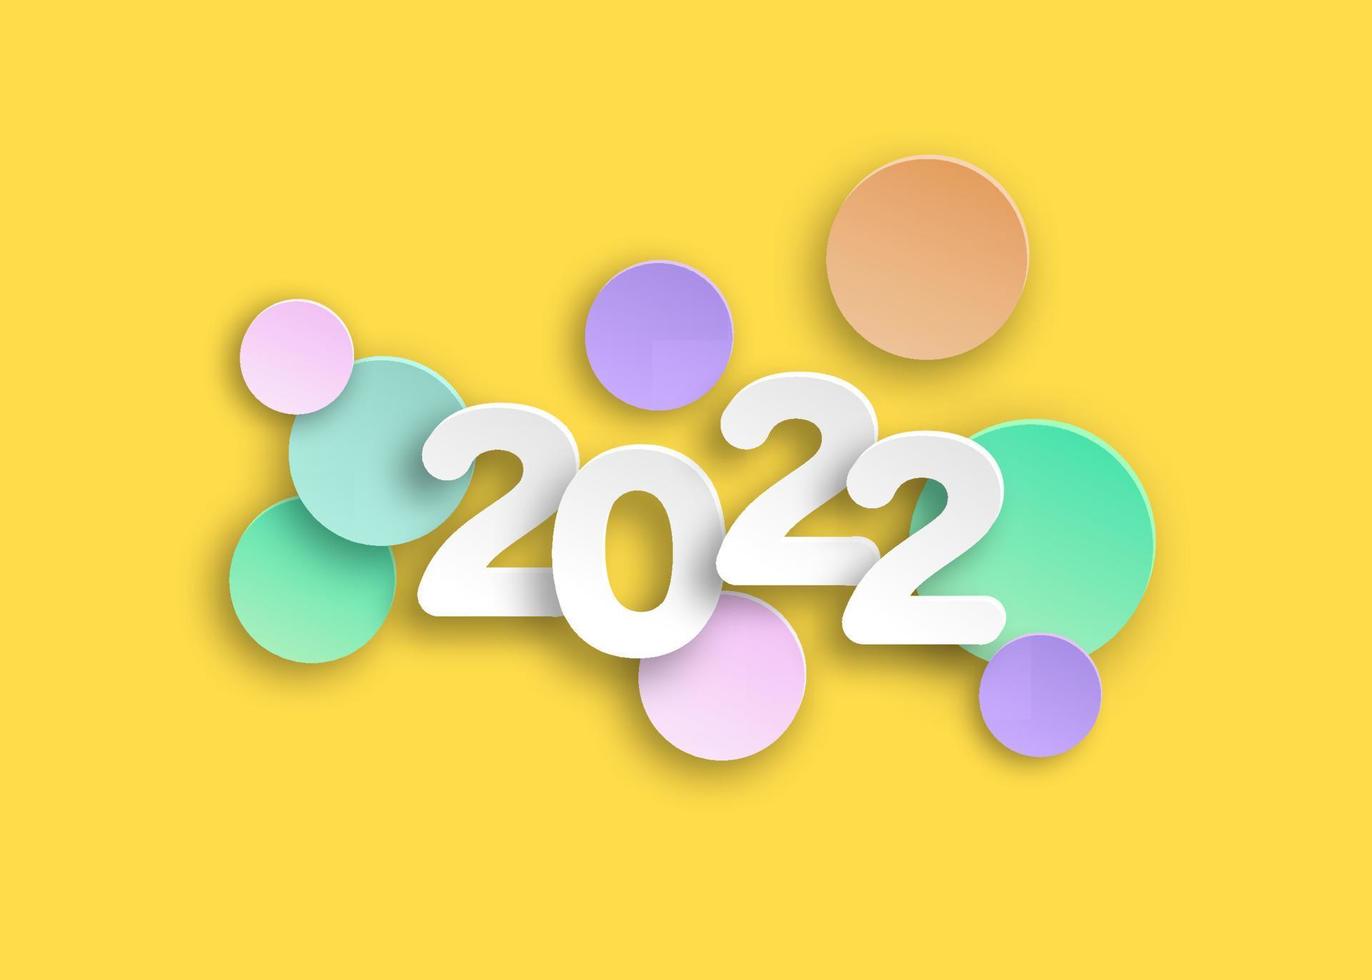 New year 2022 paper cut numbers in delicate colors. Decorative greeting card 2022 happy new year. Colorful Christmas banner, vector illustration isolated on yellow background